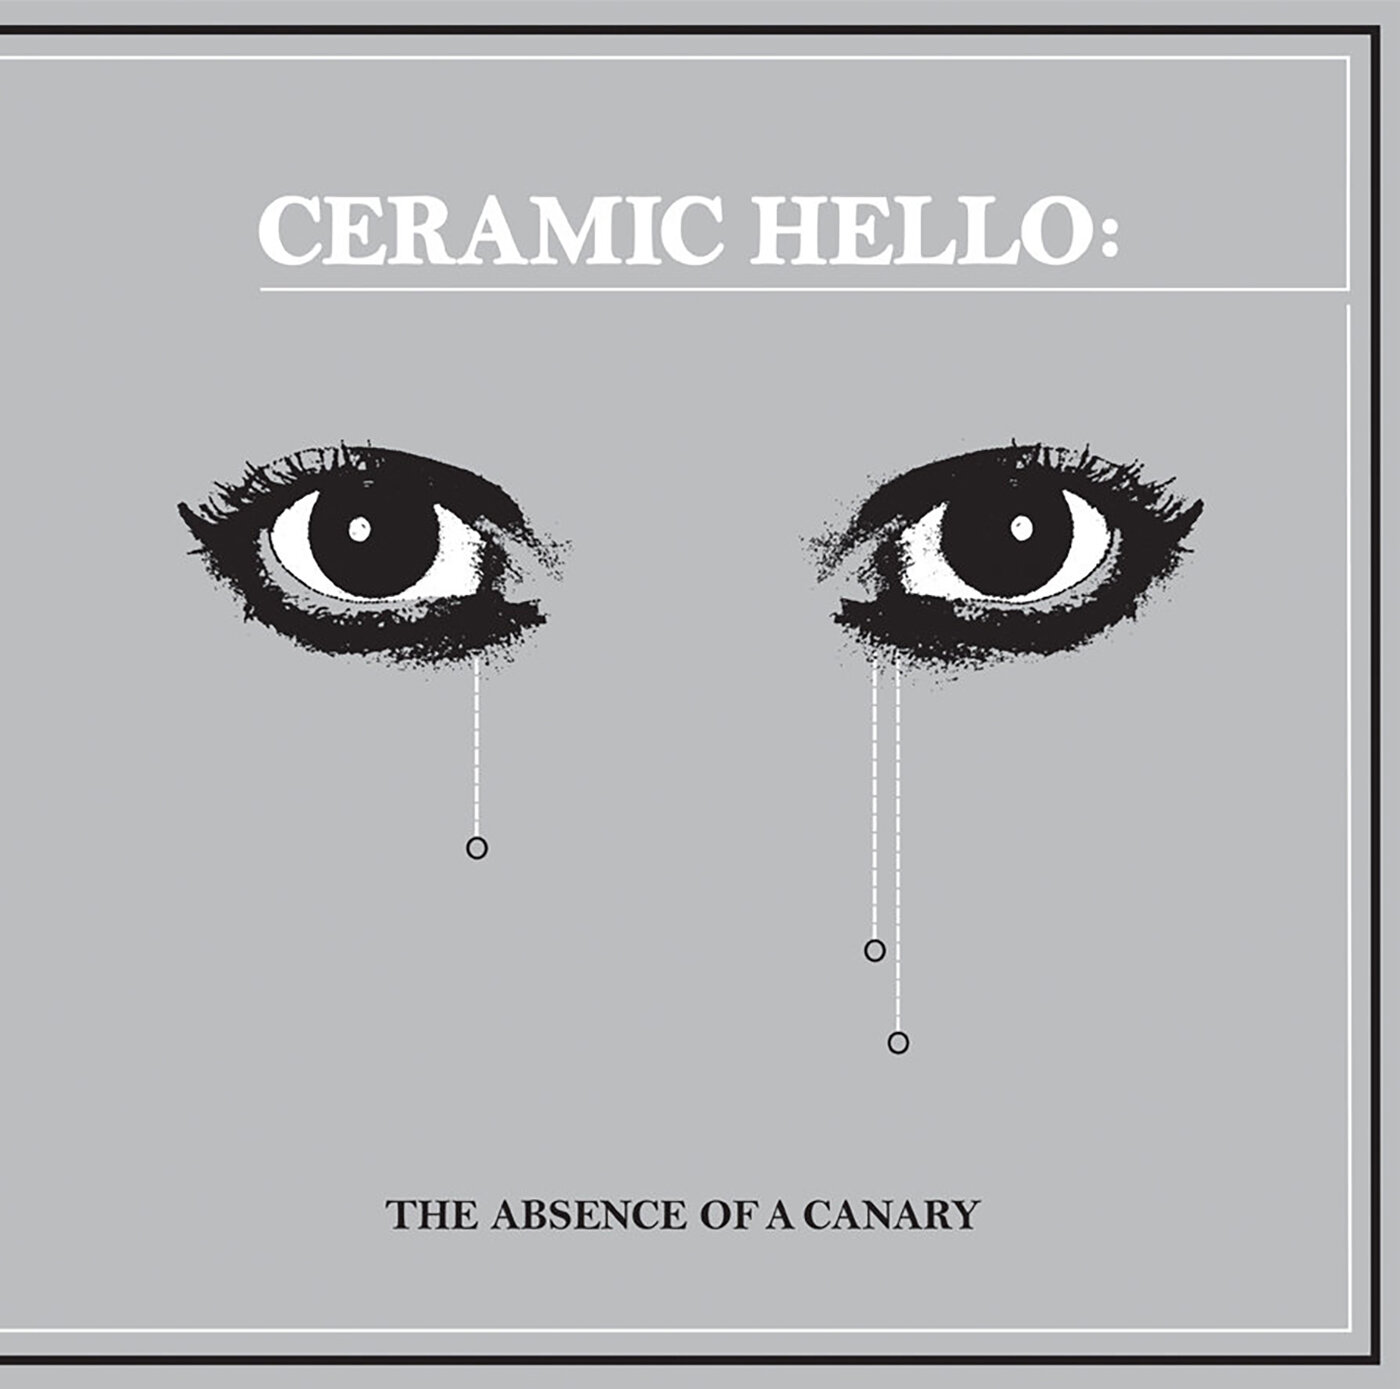 Ceramic Hello - The Absence Of A Canary (Copy)